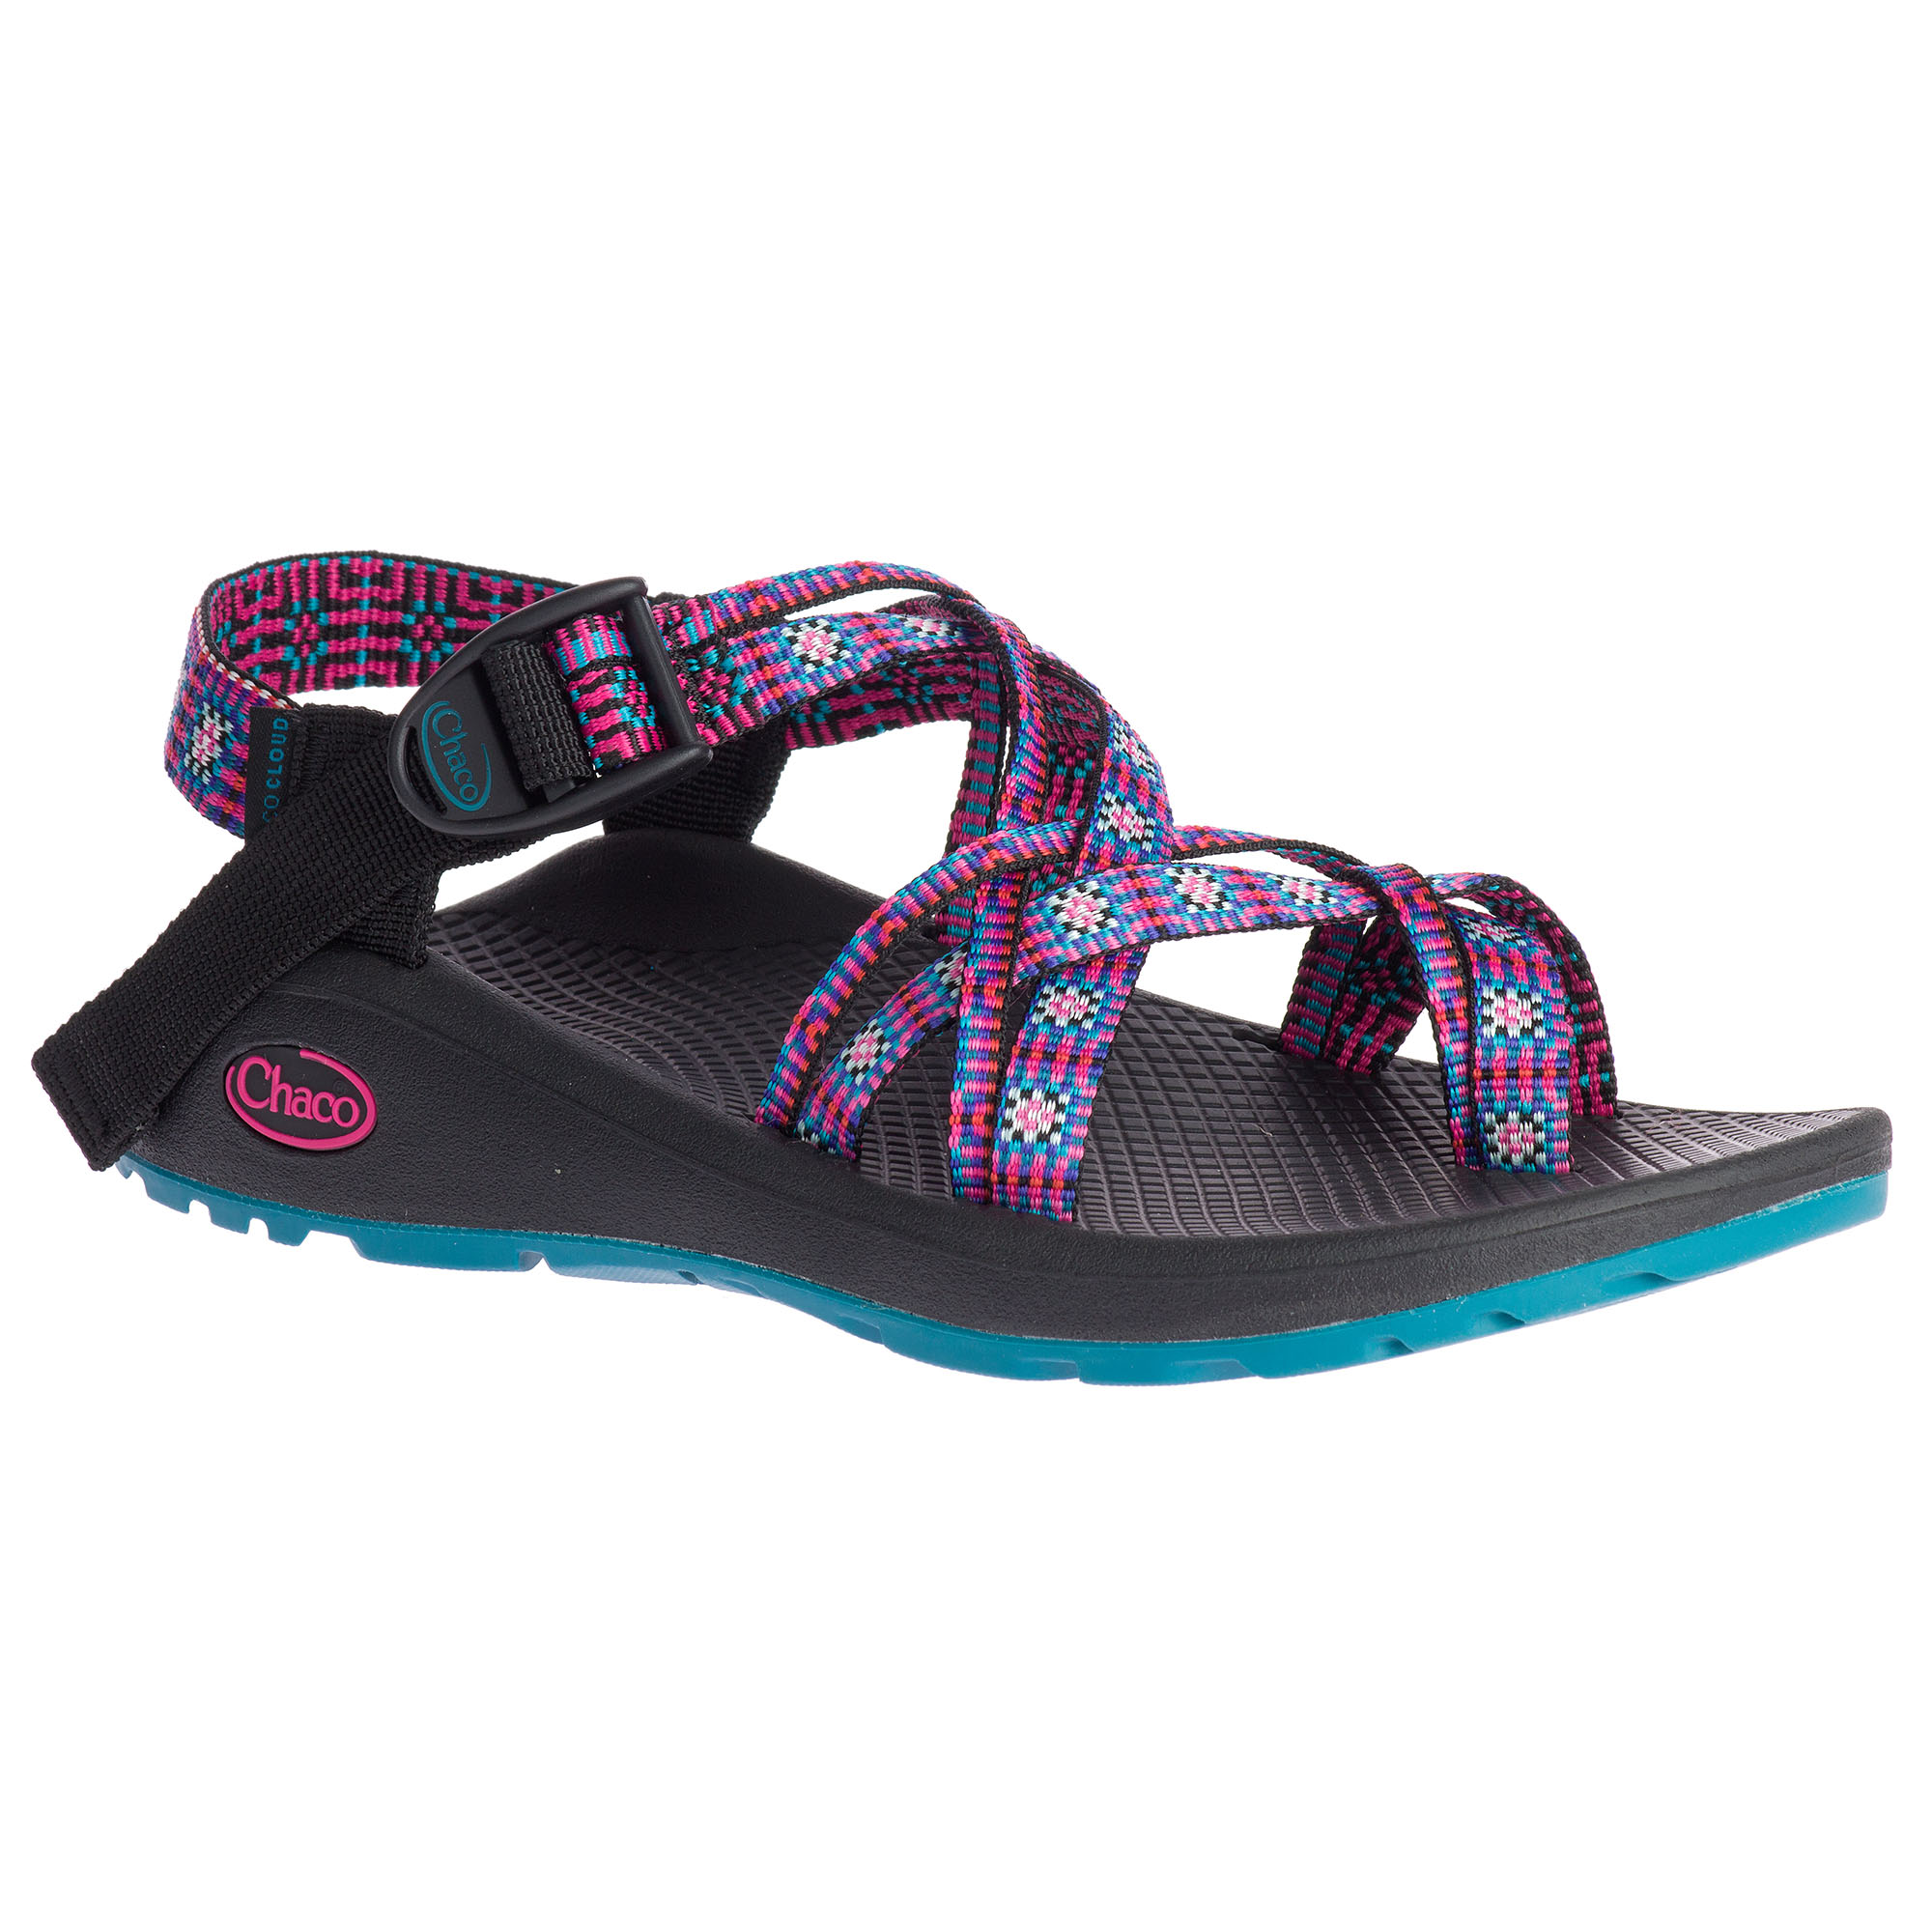 hot pink chacos